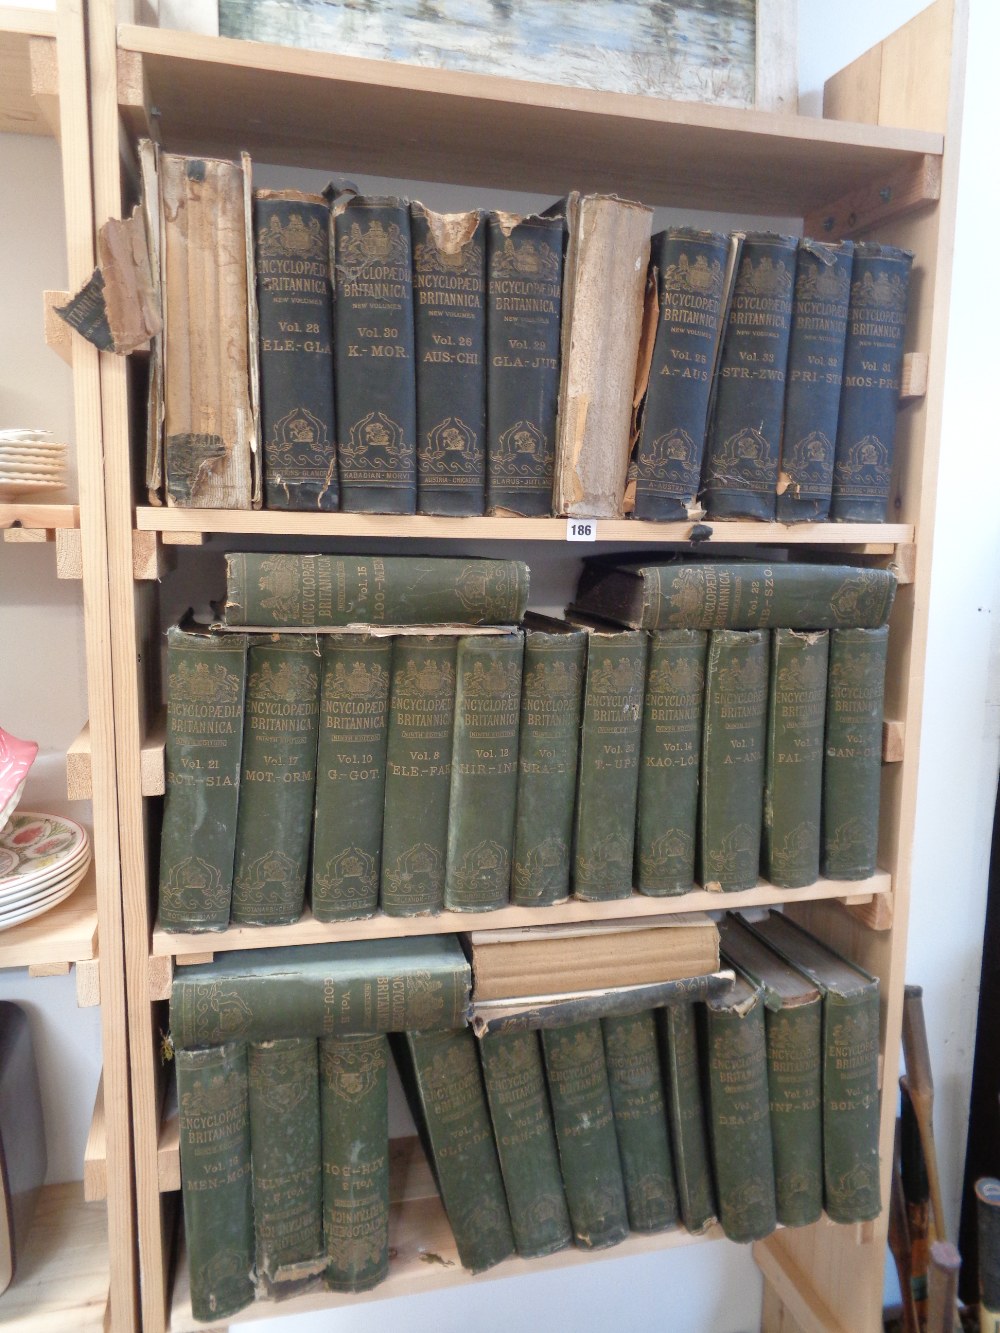 Large Collection of Ninth and other Edition Encyclopaedia Britannica